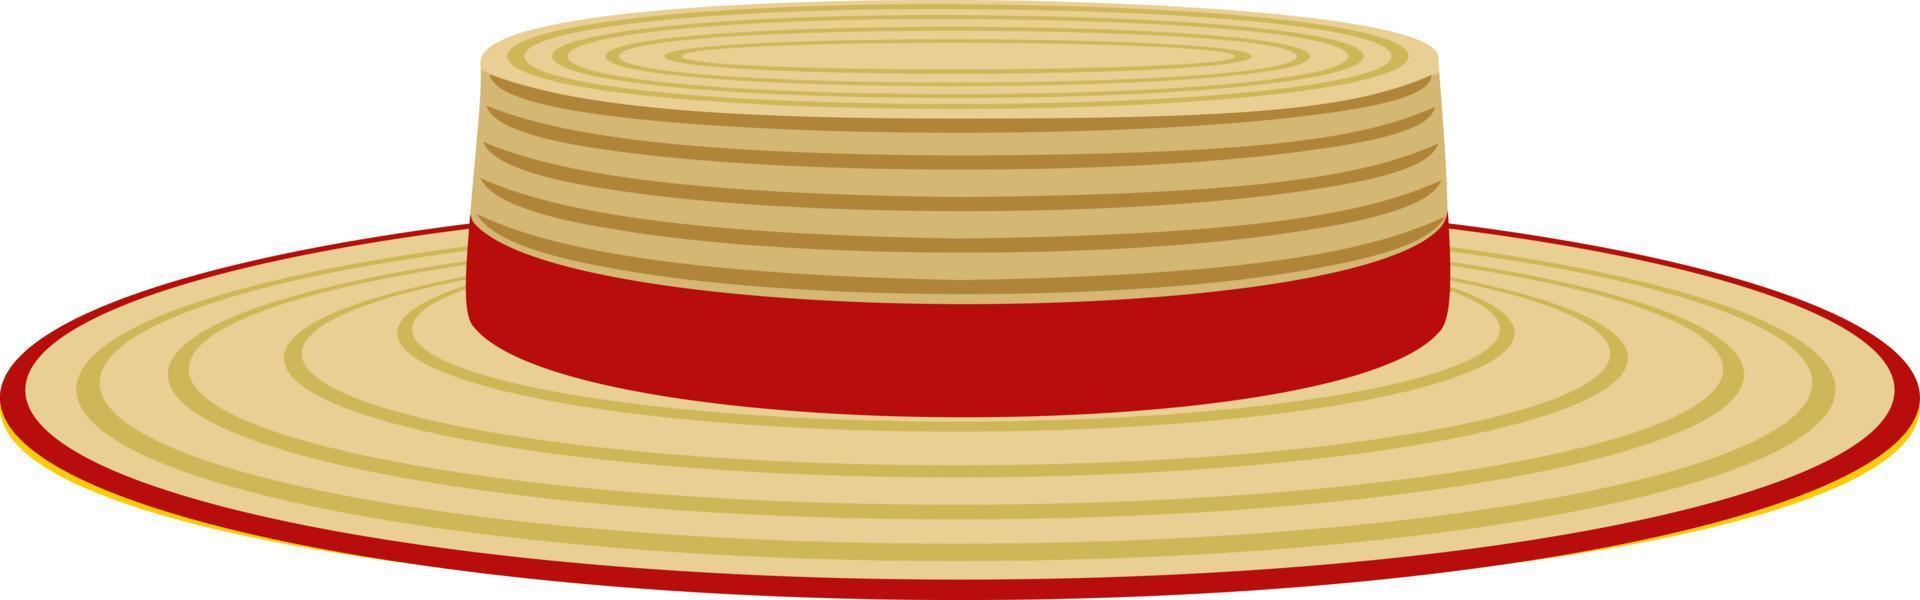 A straw hat with a wide brim. A woven headdress or a slap on the back of the head. Hats, head accessories of various types and styles vector